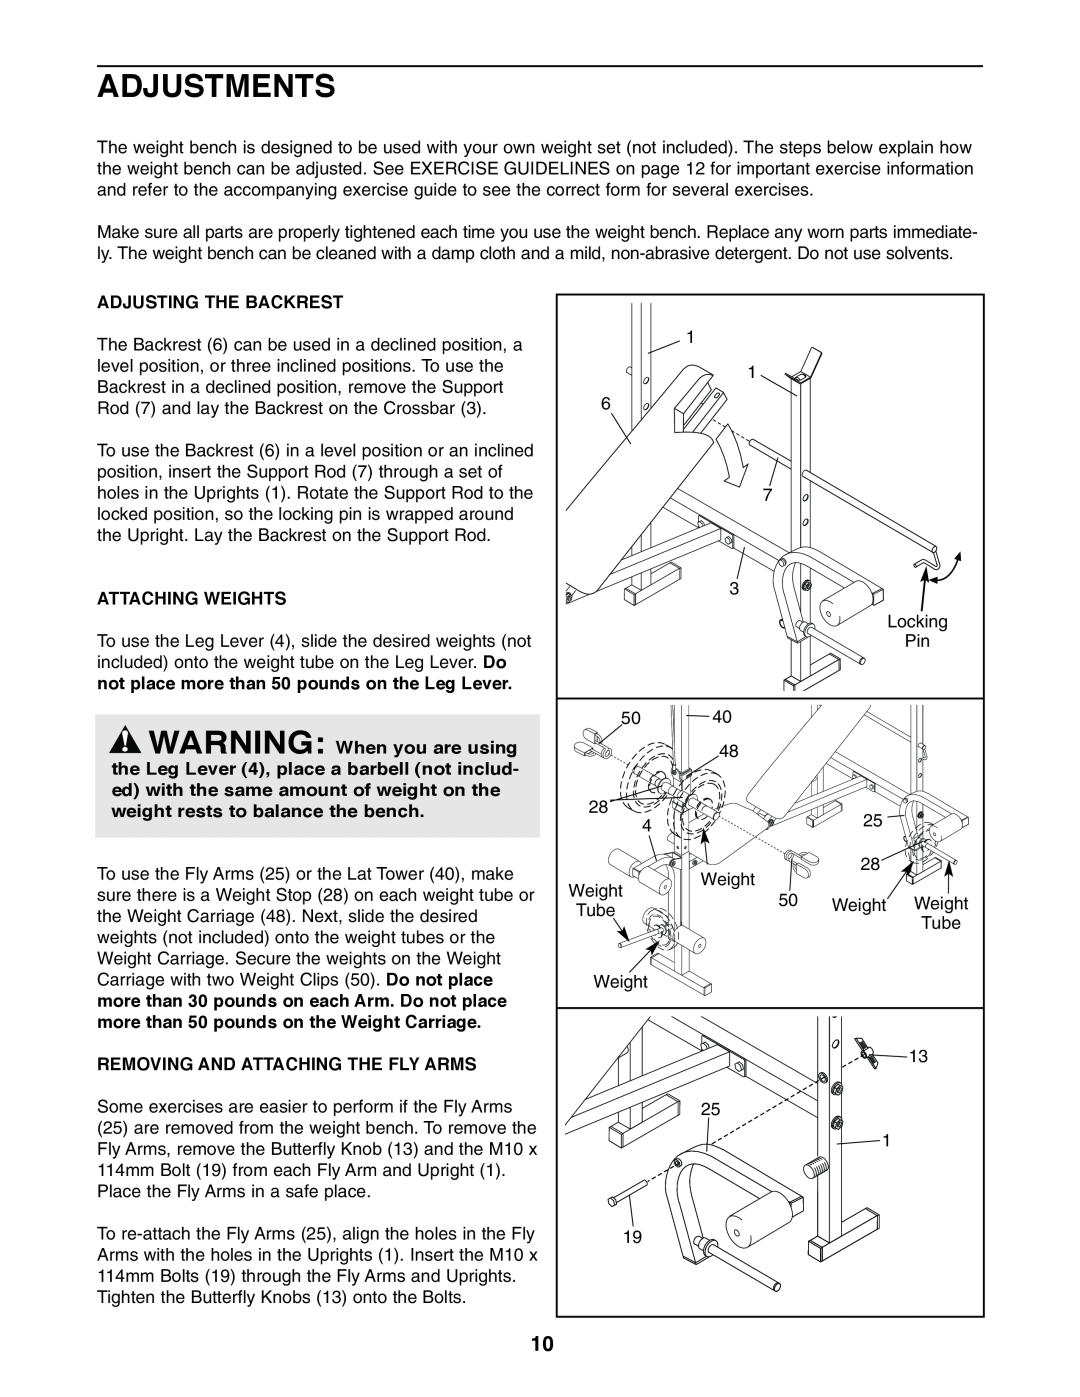 Weslo WEBE13810 user manual Adjustments, Adjusting The Backrest, Attaching Weights, Removing And Attaching The Fly Arms 